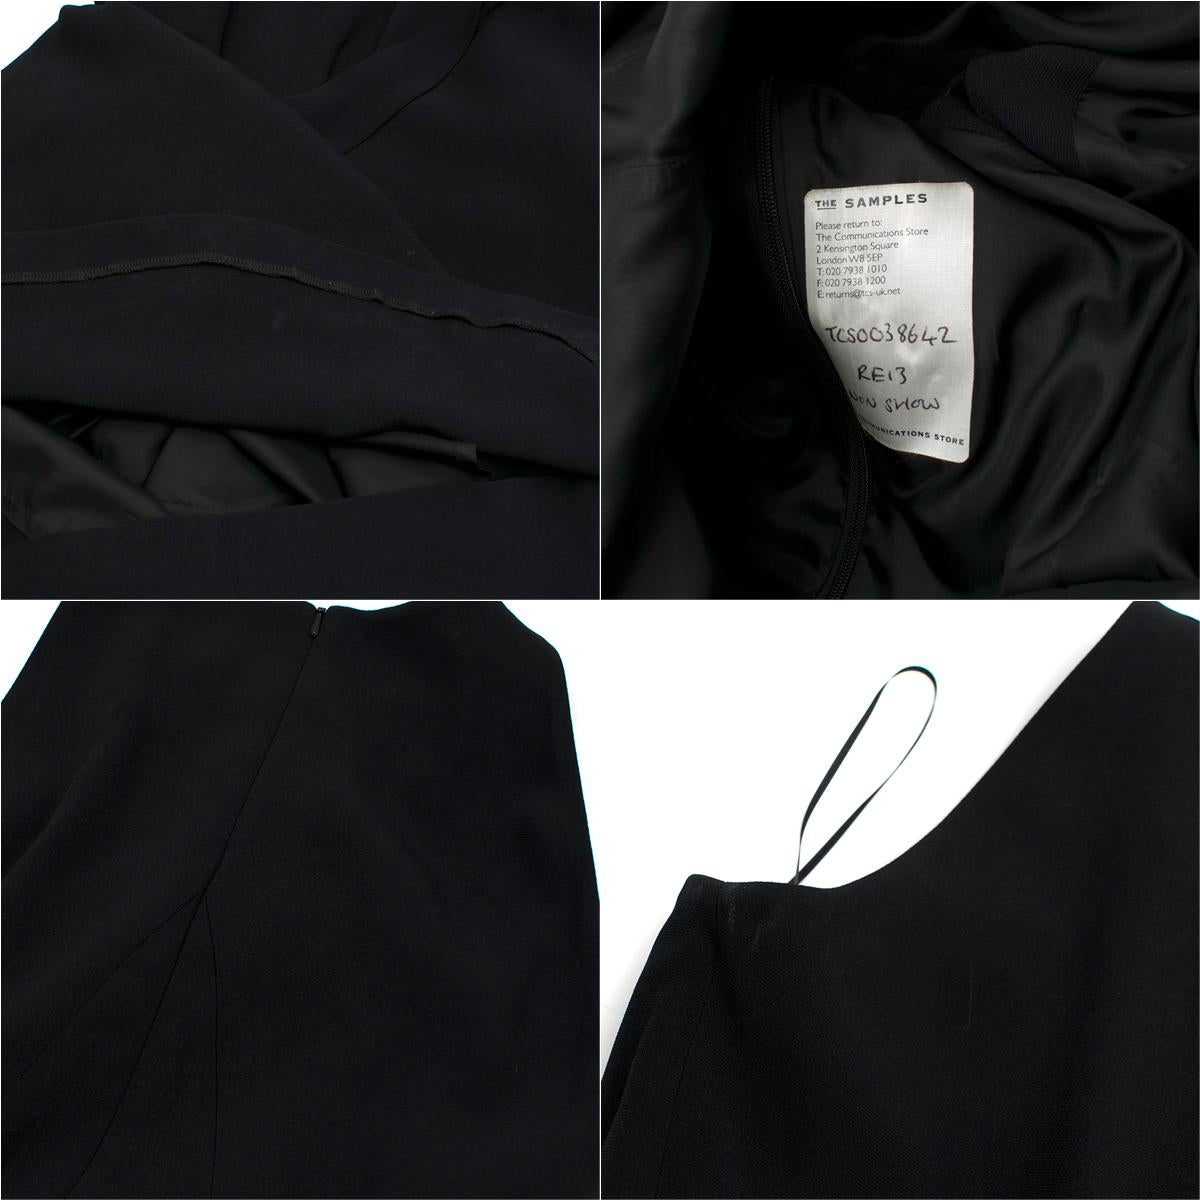 Osman Black Long Dress with Leather Collar estimated SIZE XS-S 4